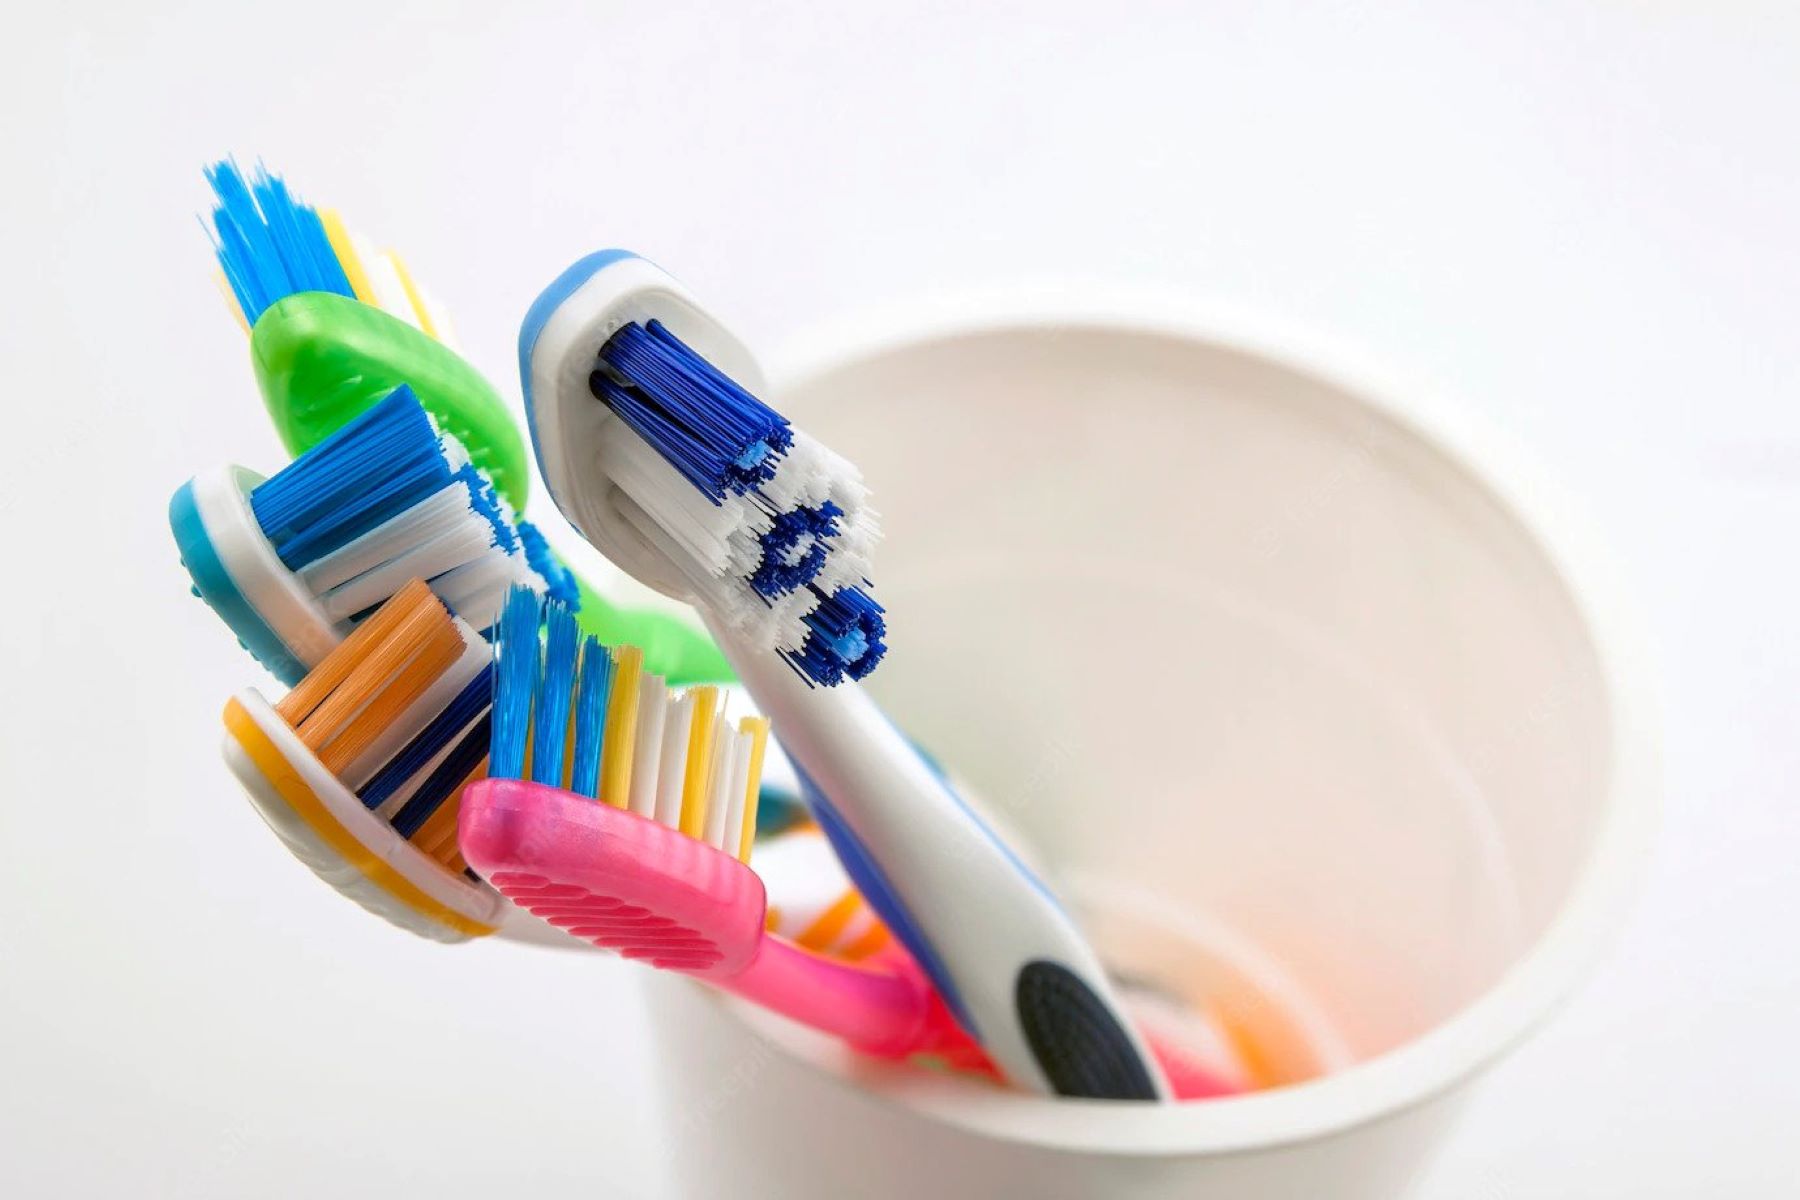 How To Prevent Mold On Toothbrush